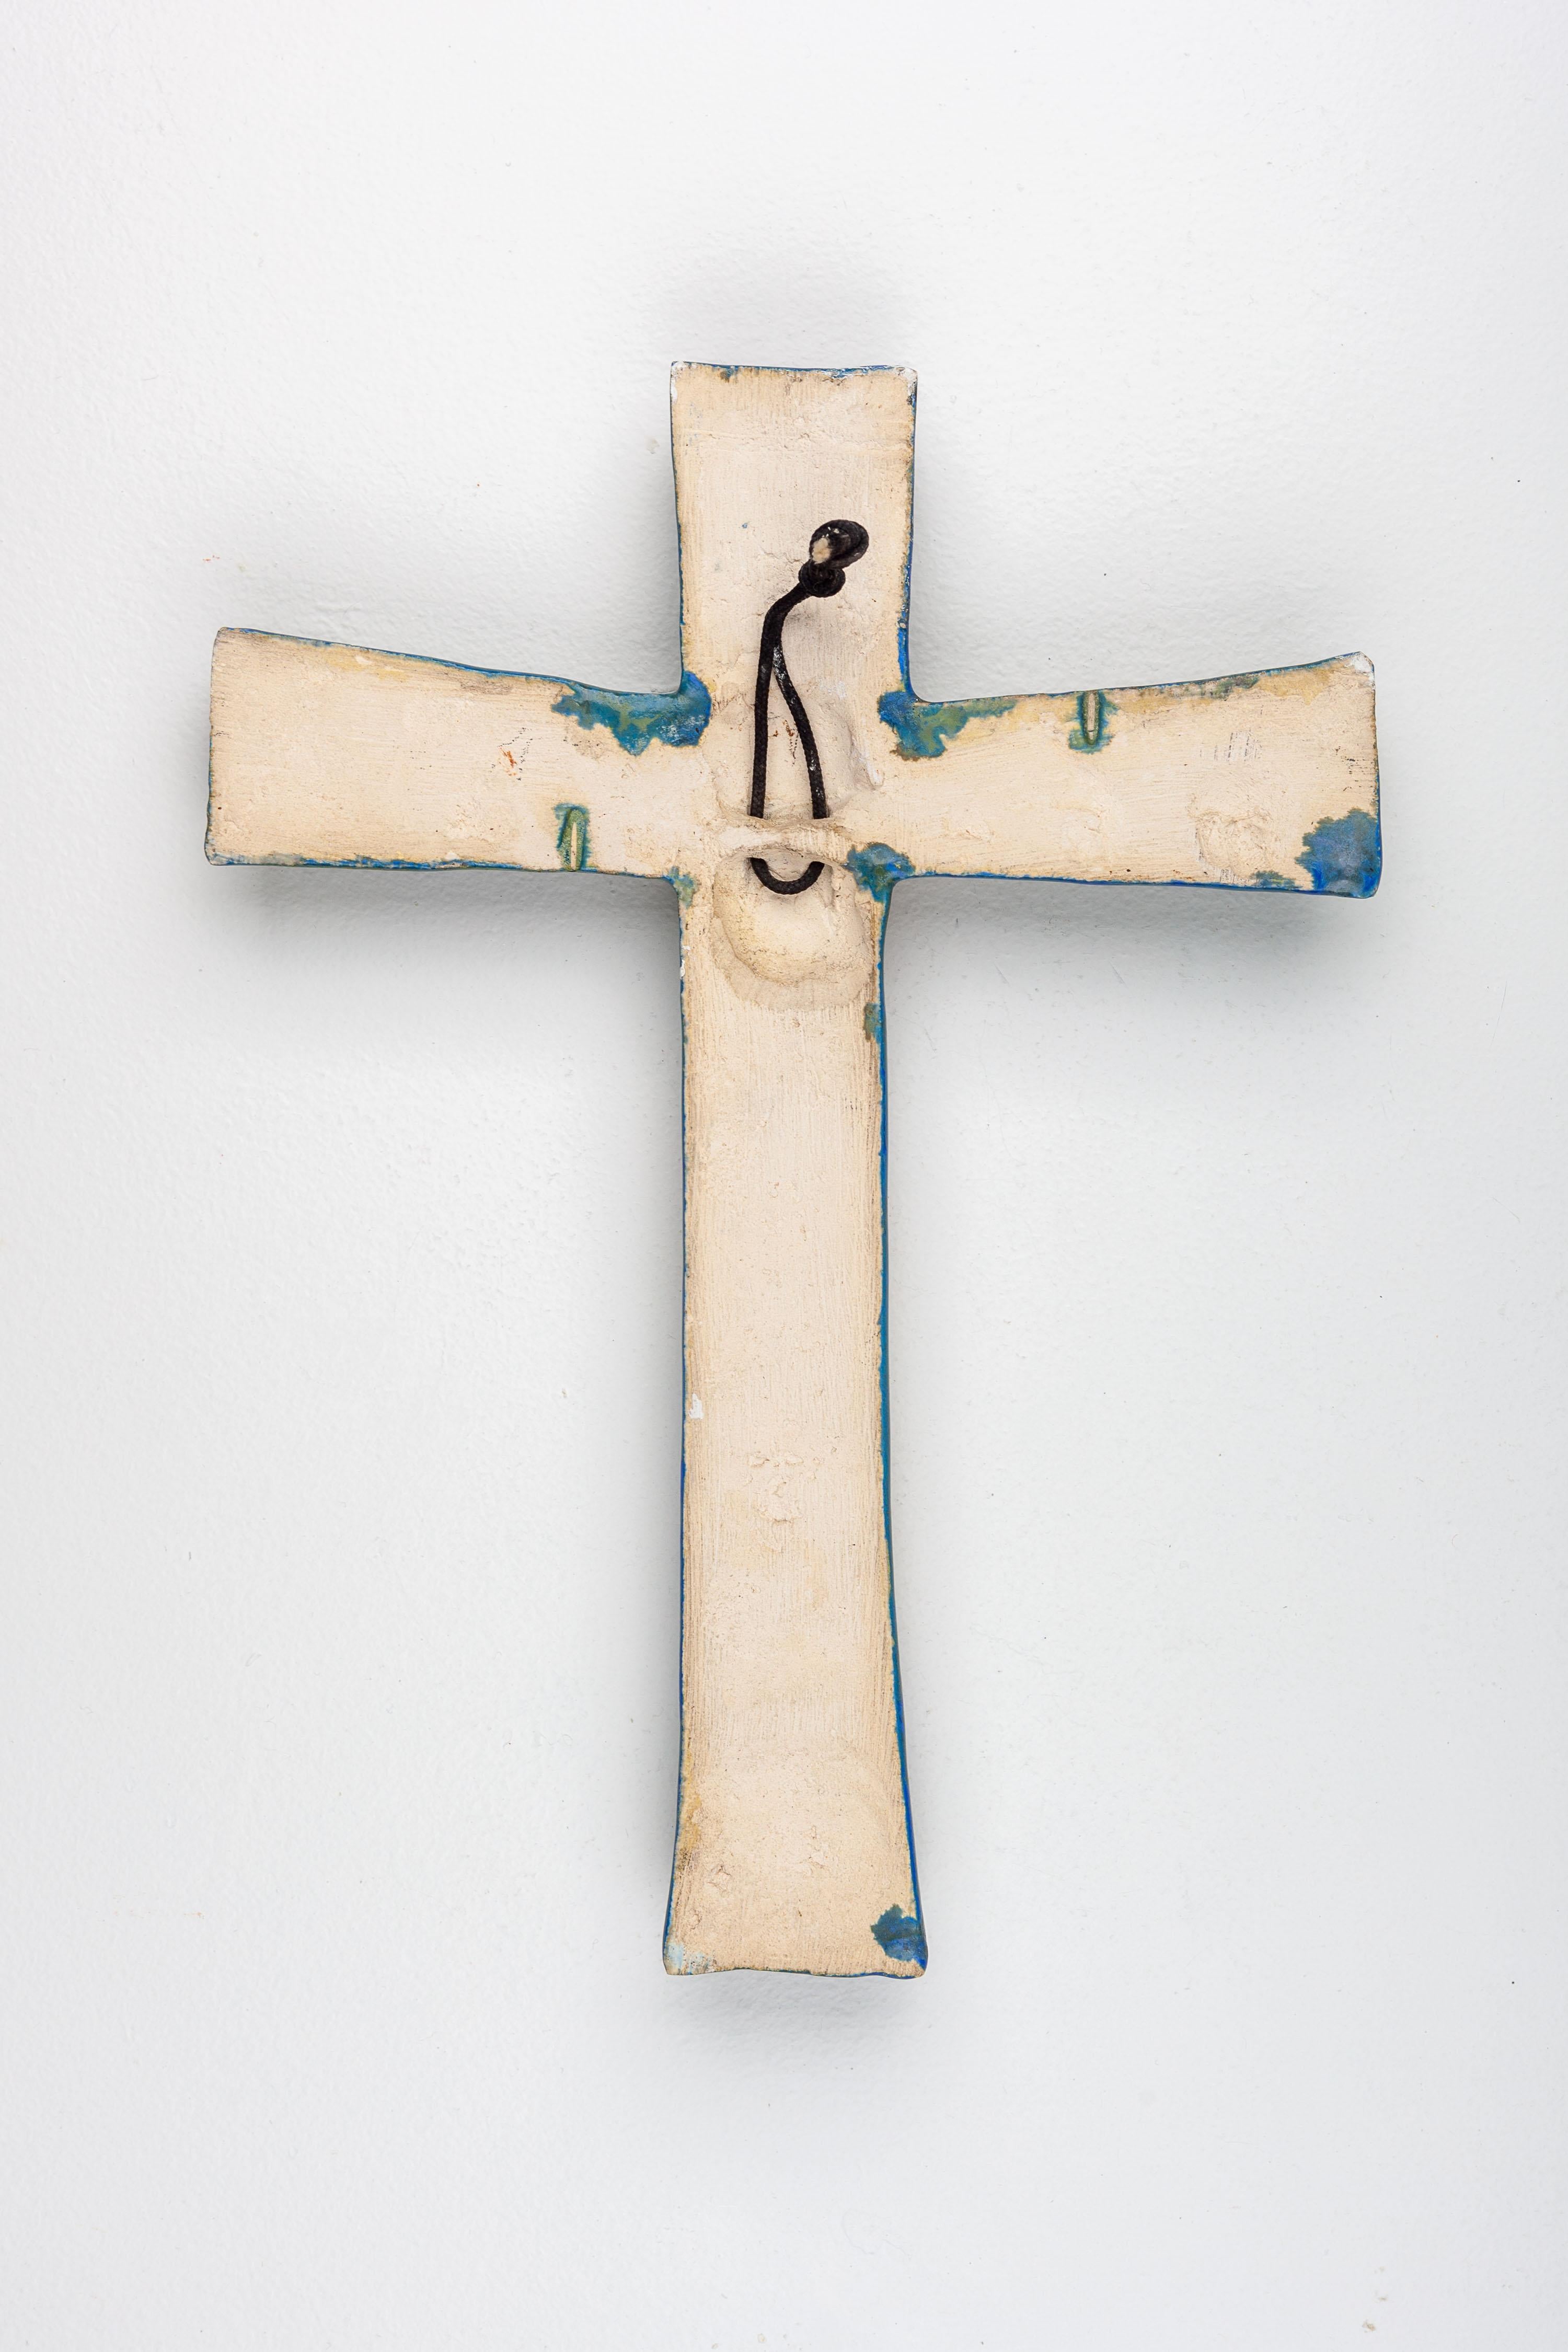 Modernist Cobalt Blue and Gold Wall Cross - European Studio Pottery Masterpiece For Sale 7